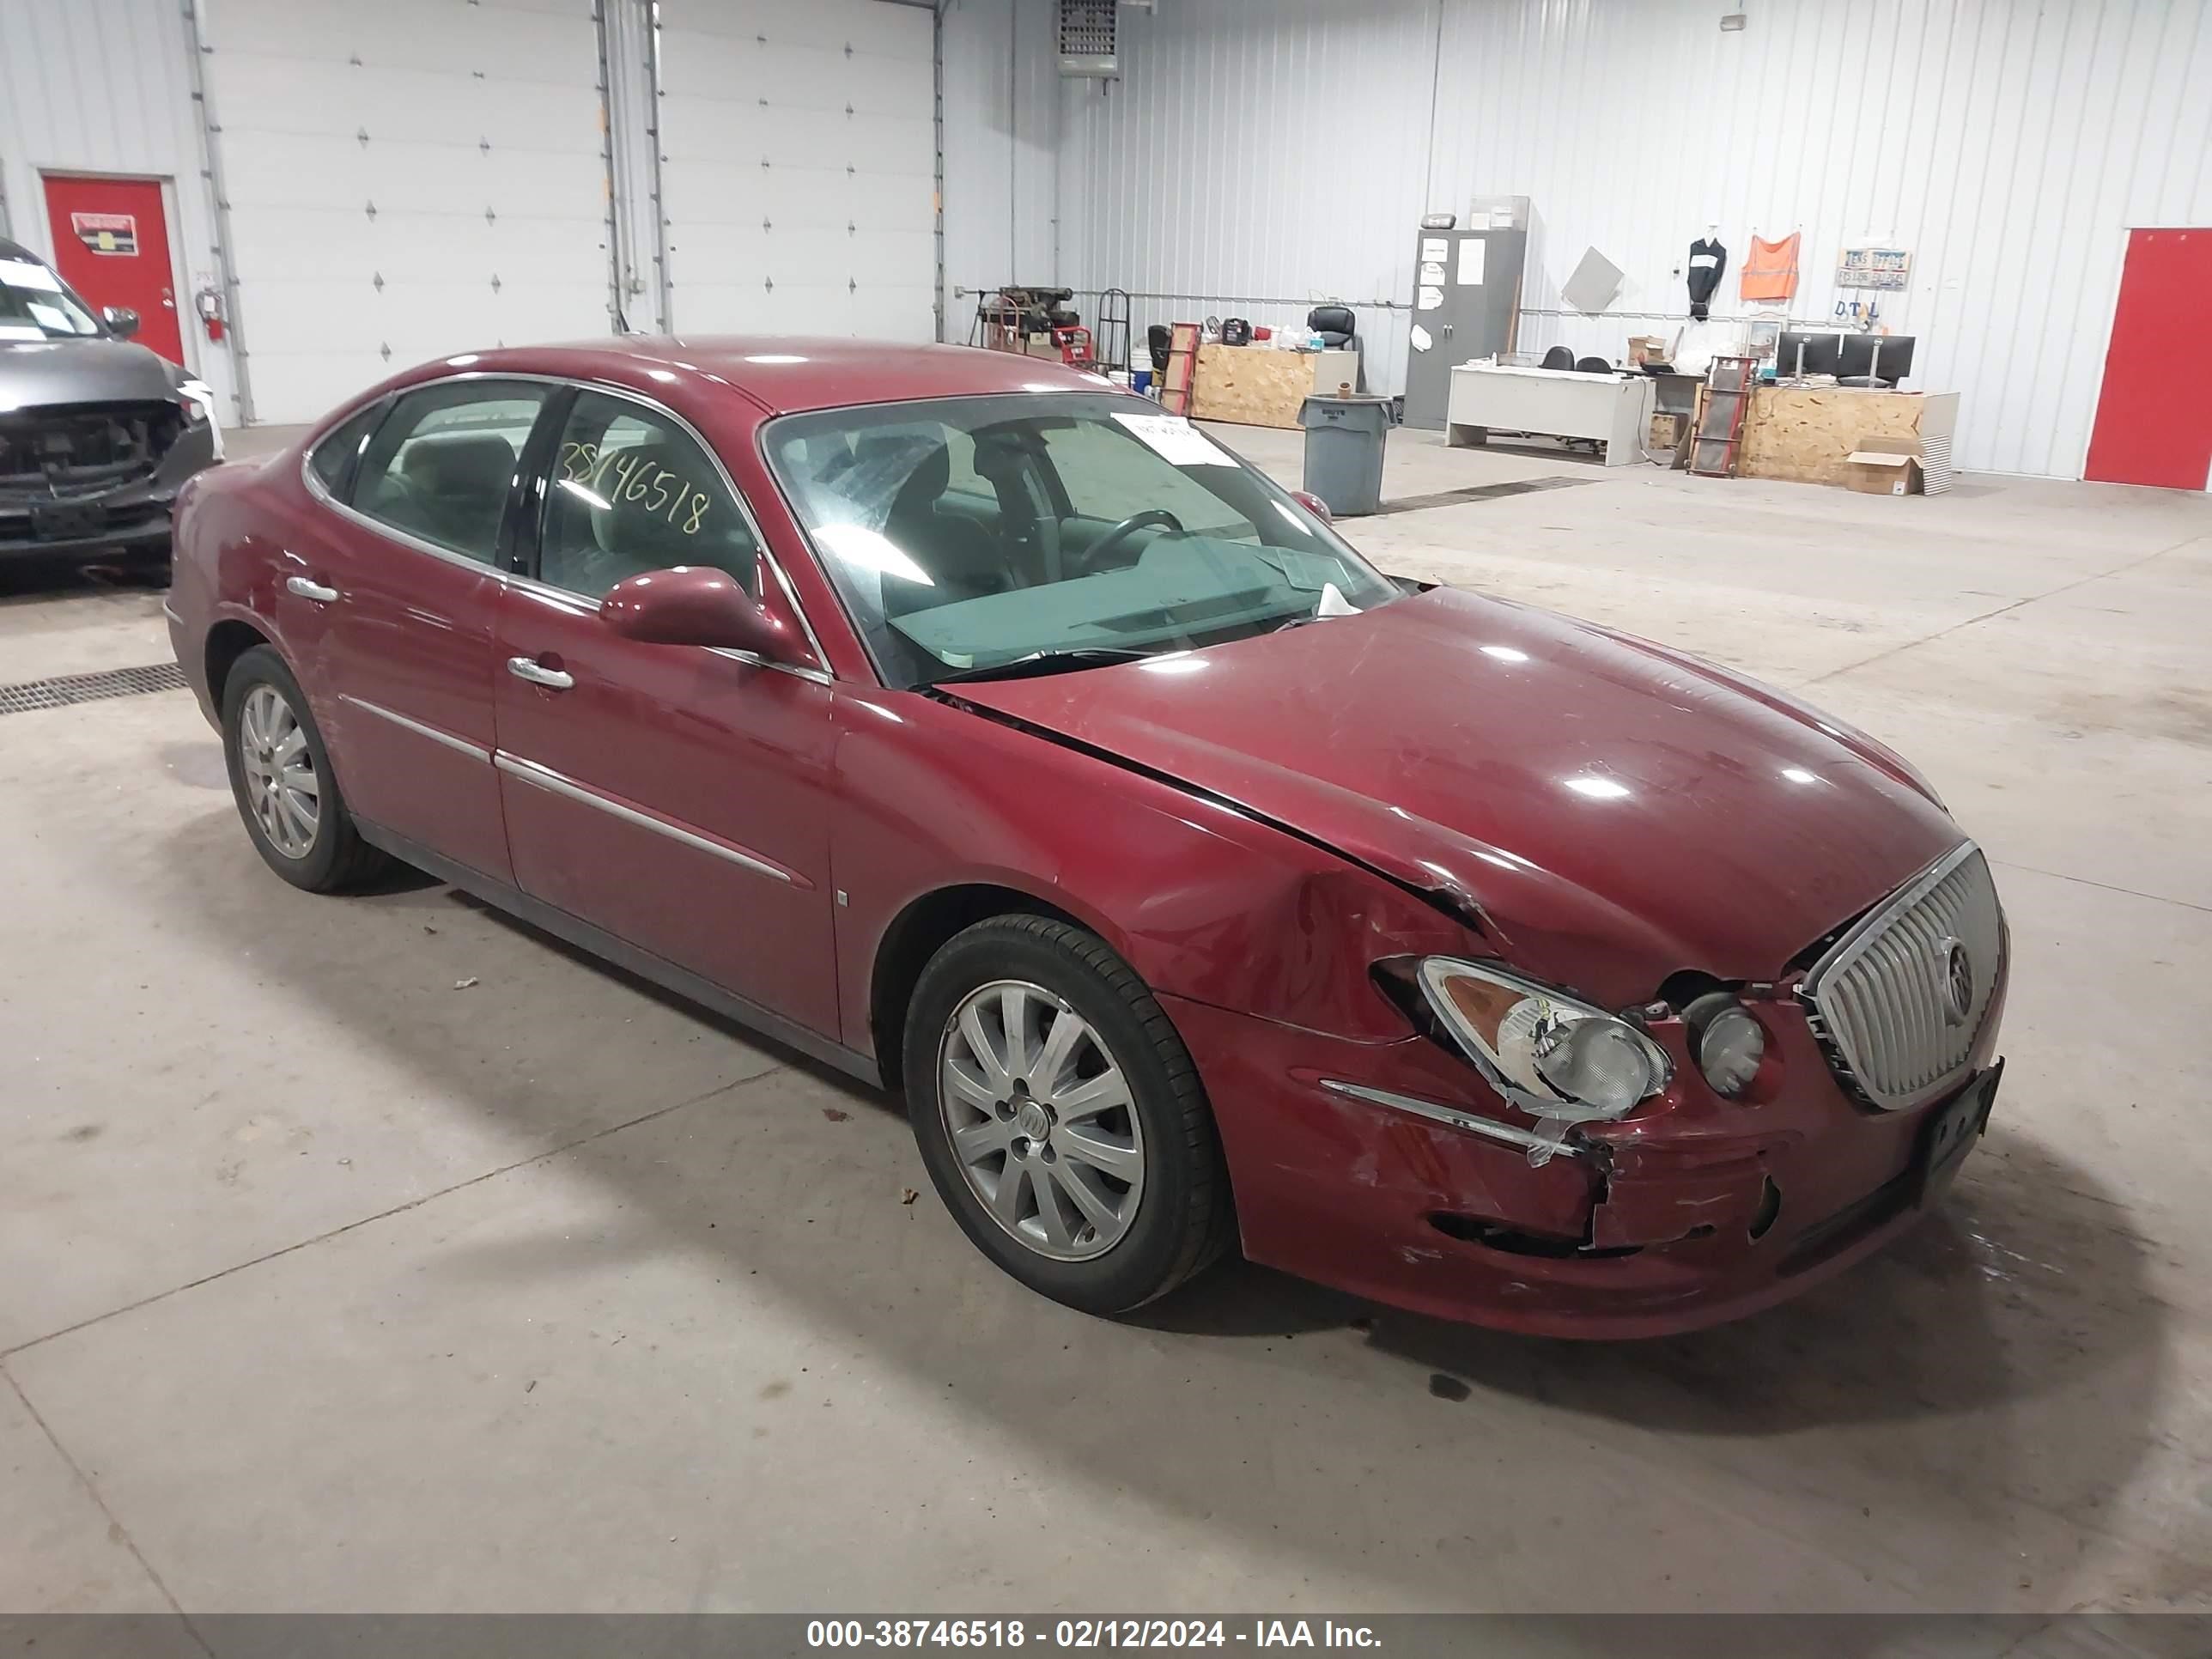 2G4WC582581371381  - BUICK LACROSSE  2008 IMG - 0